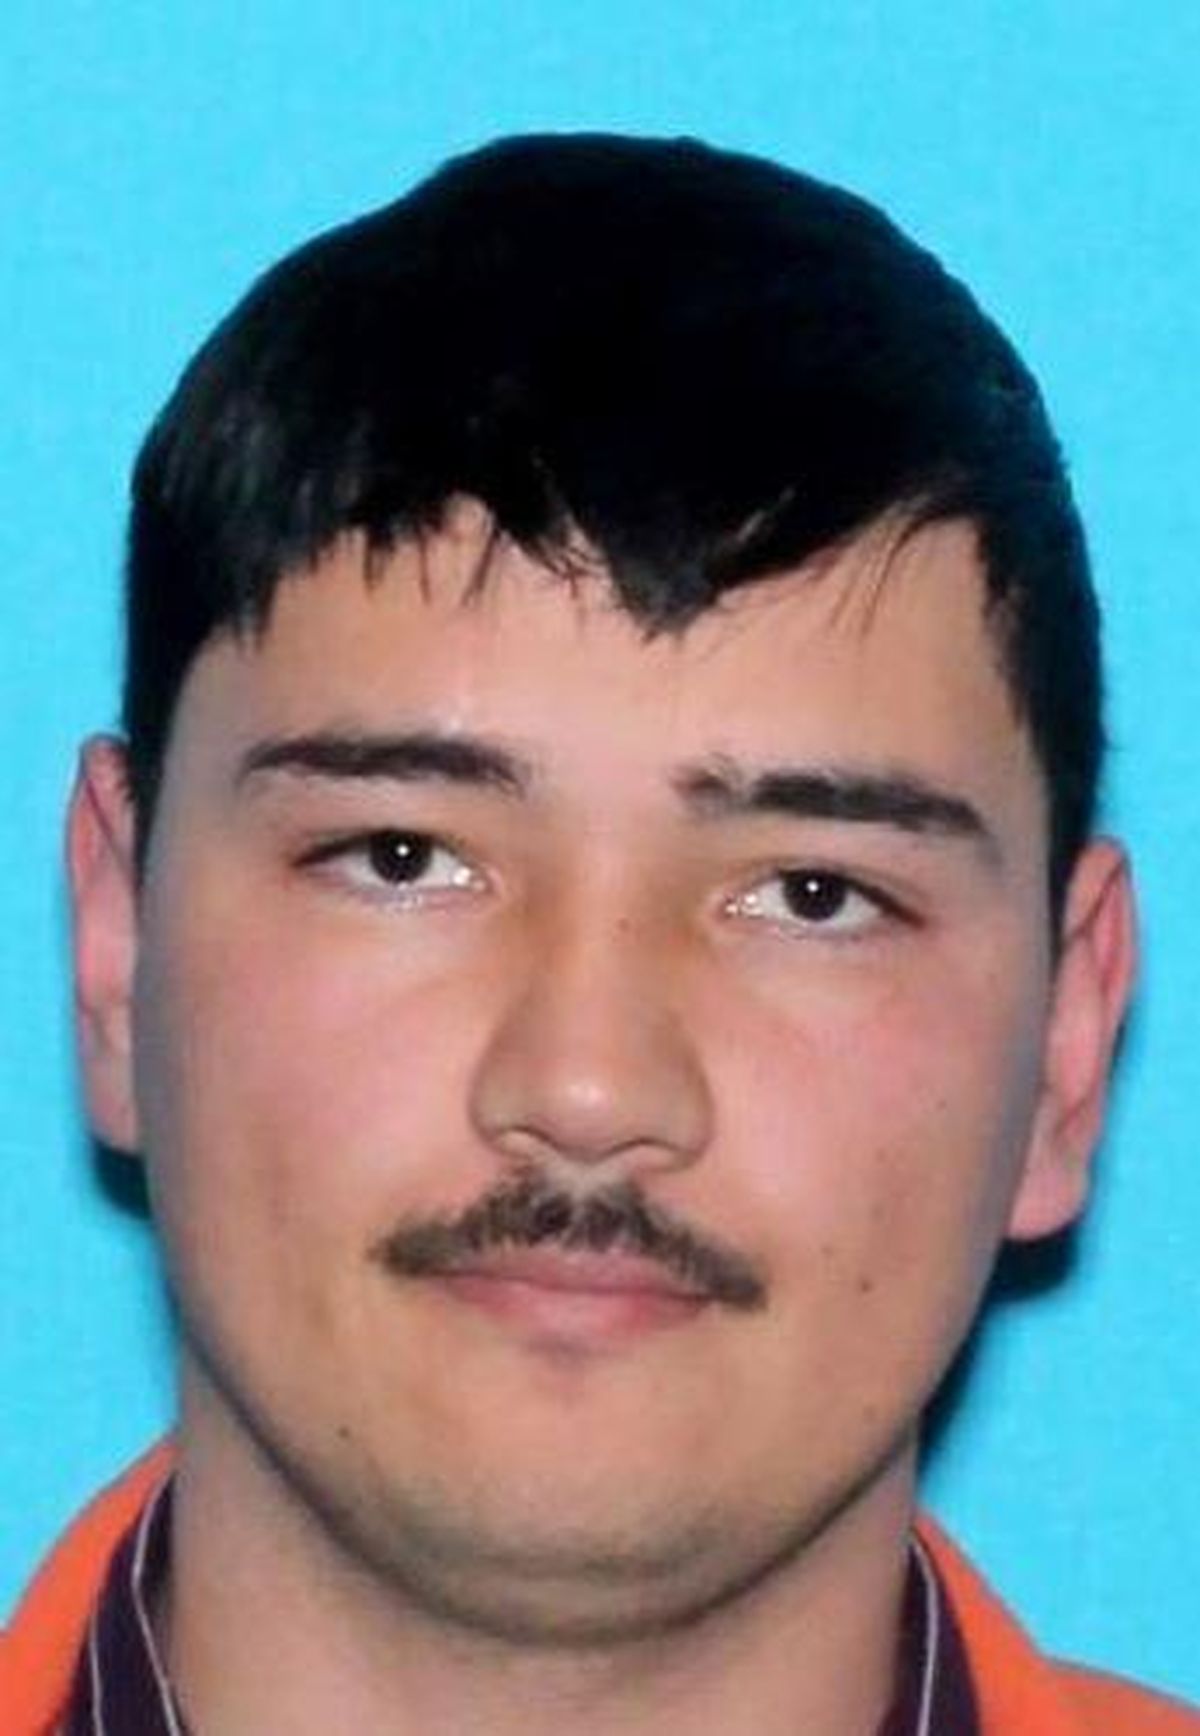 Police believe, Jose Lopez-madrigal, 32, is suicidal and took his 3-year-old daughter with him to an unknown location. (Elizabeth A. Vazquez / Courtesy of Amber Alert)